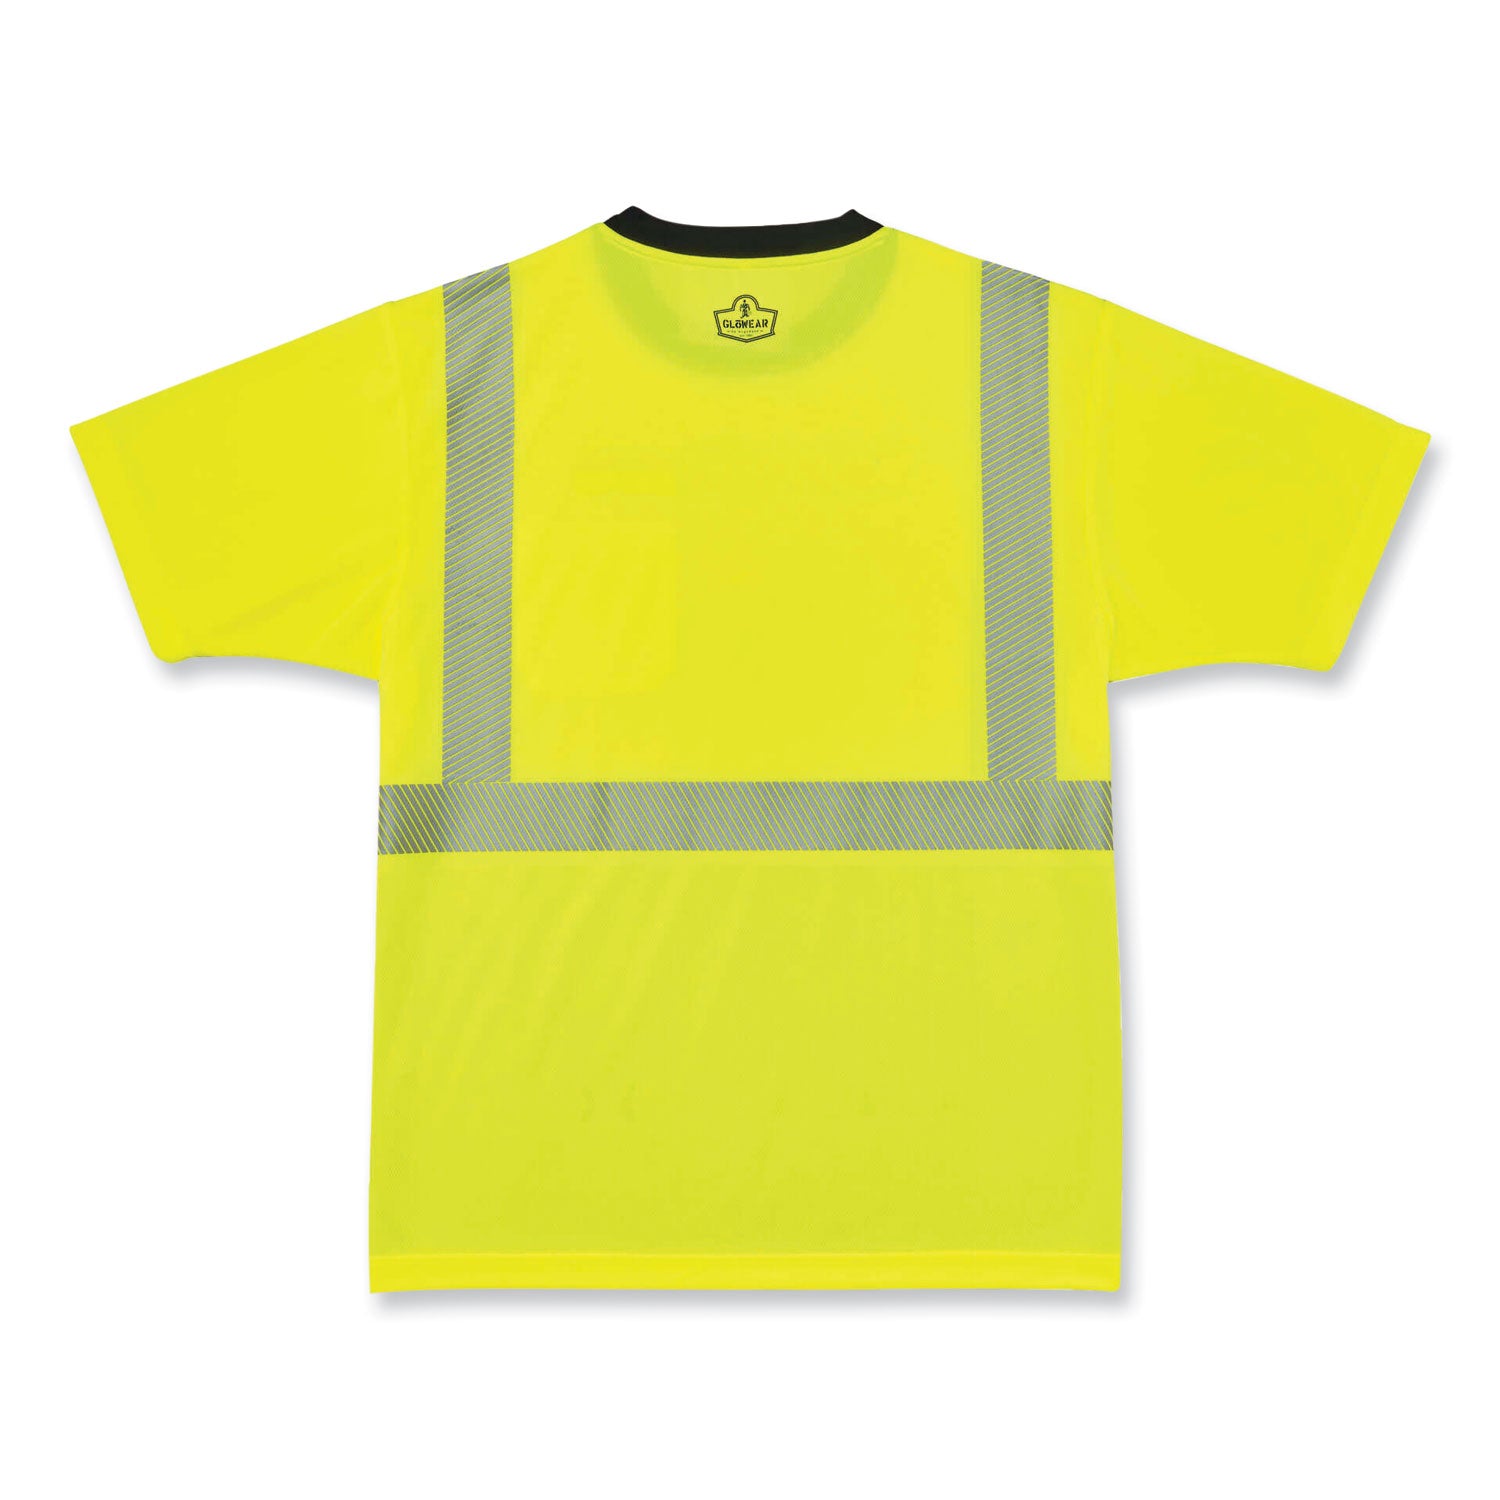 glowear-8280bk-class-2-performance-t-shirt-with-black-bottom-polyester-x-large-lime-ships-in-1-3-business-days_ego22535 - 2